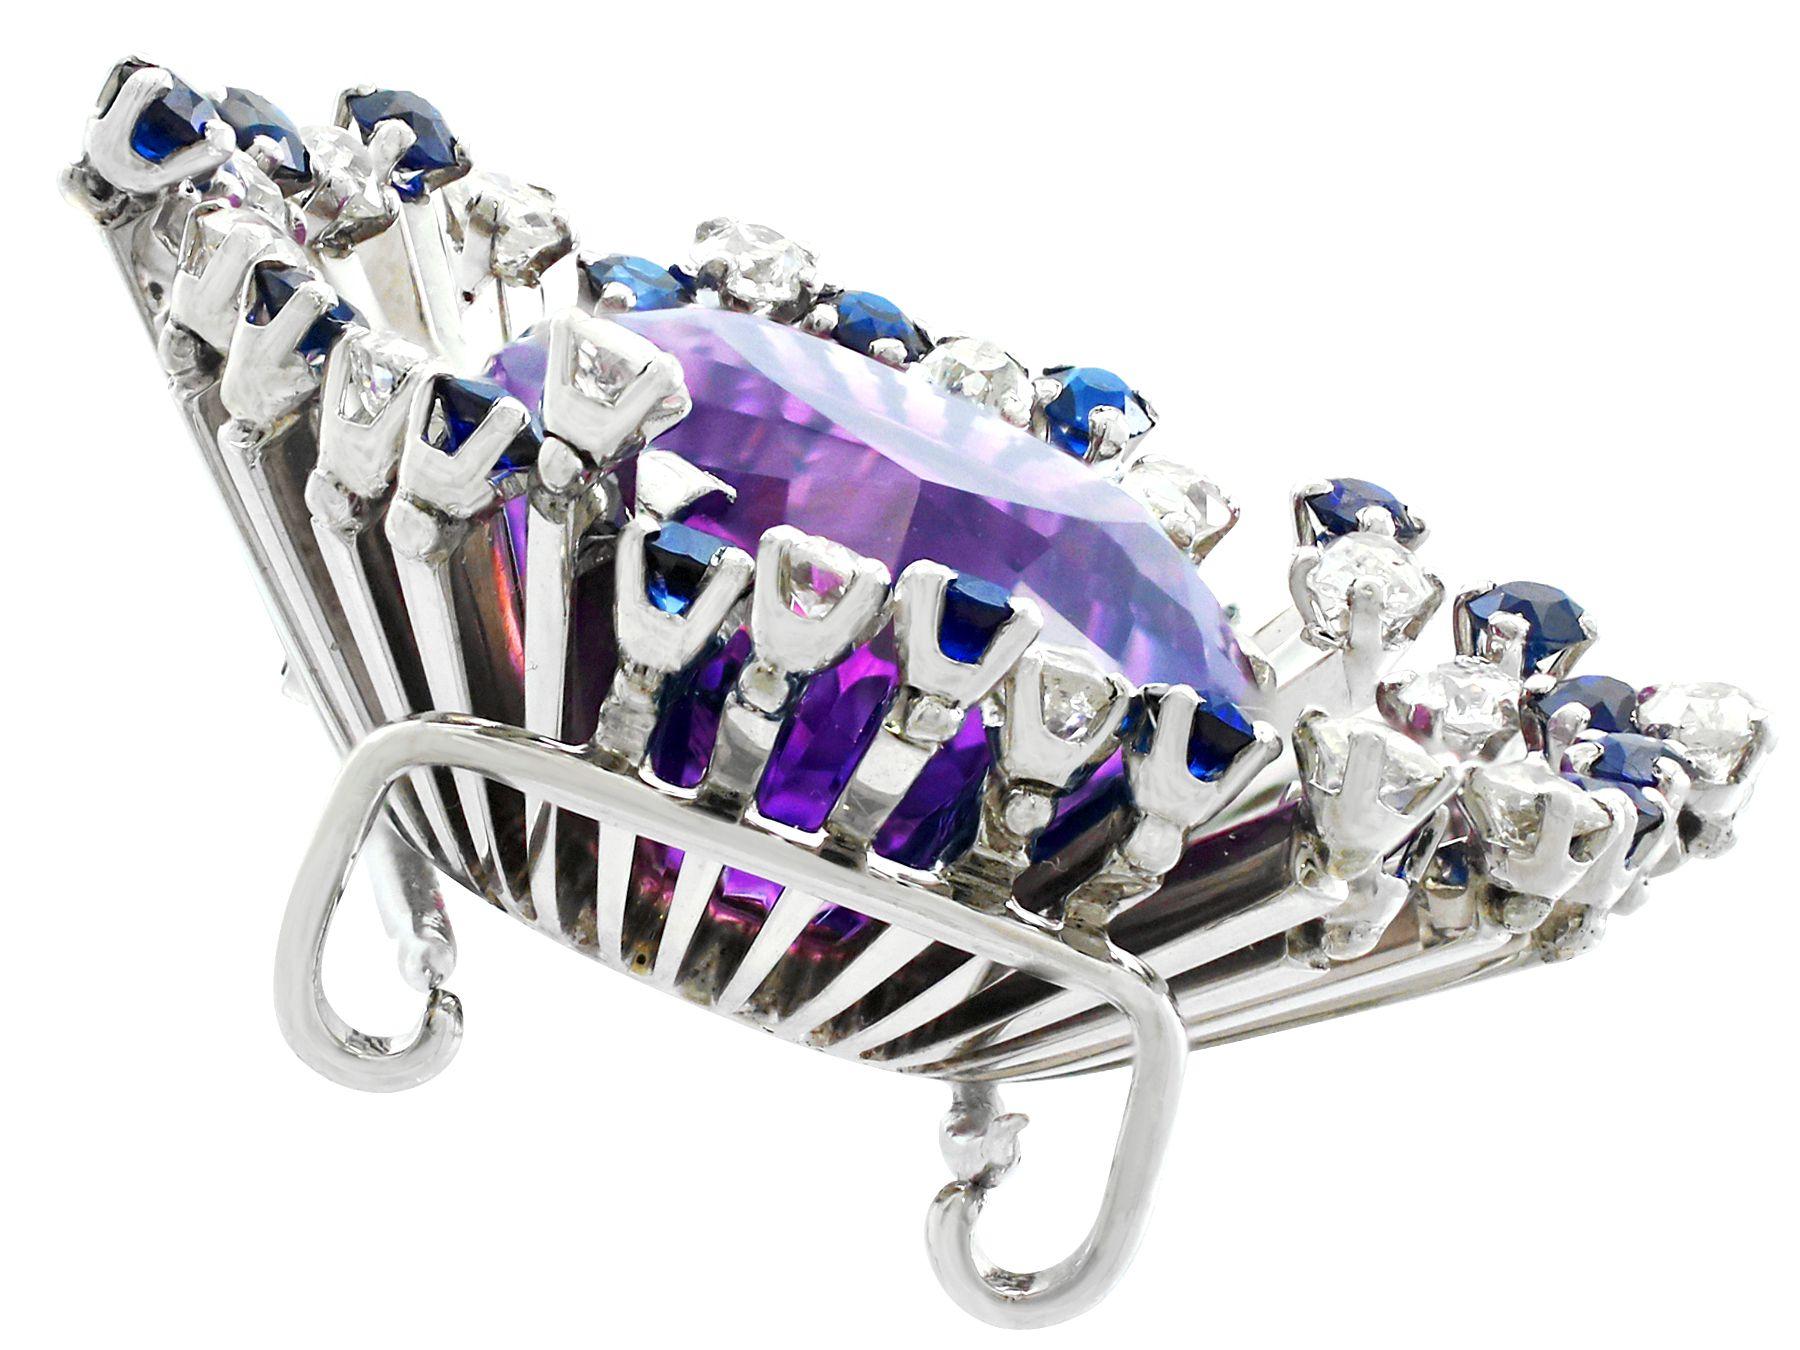 21.88ct Amethyst 1.80 Carat Diamond 1.44 Carat Sapphire and White Gold Brooch In Excellent Condition For Sale In Jesmond, Newcastle Upon Tyne